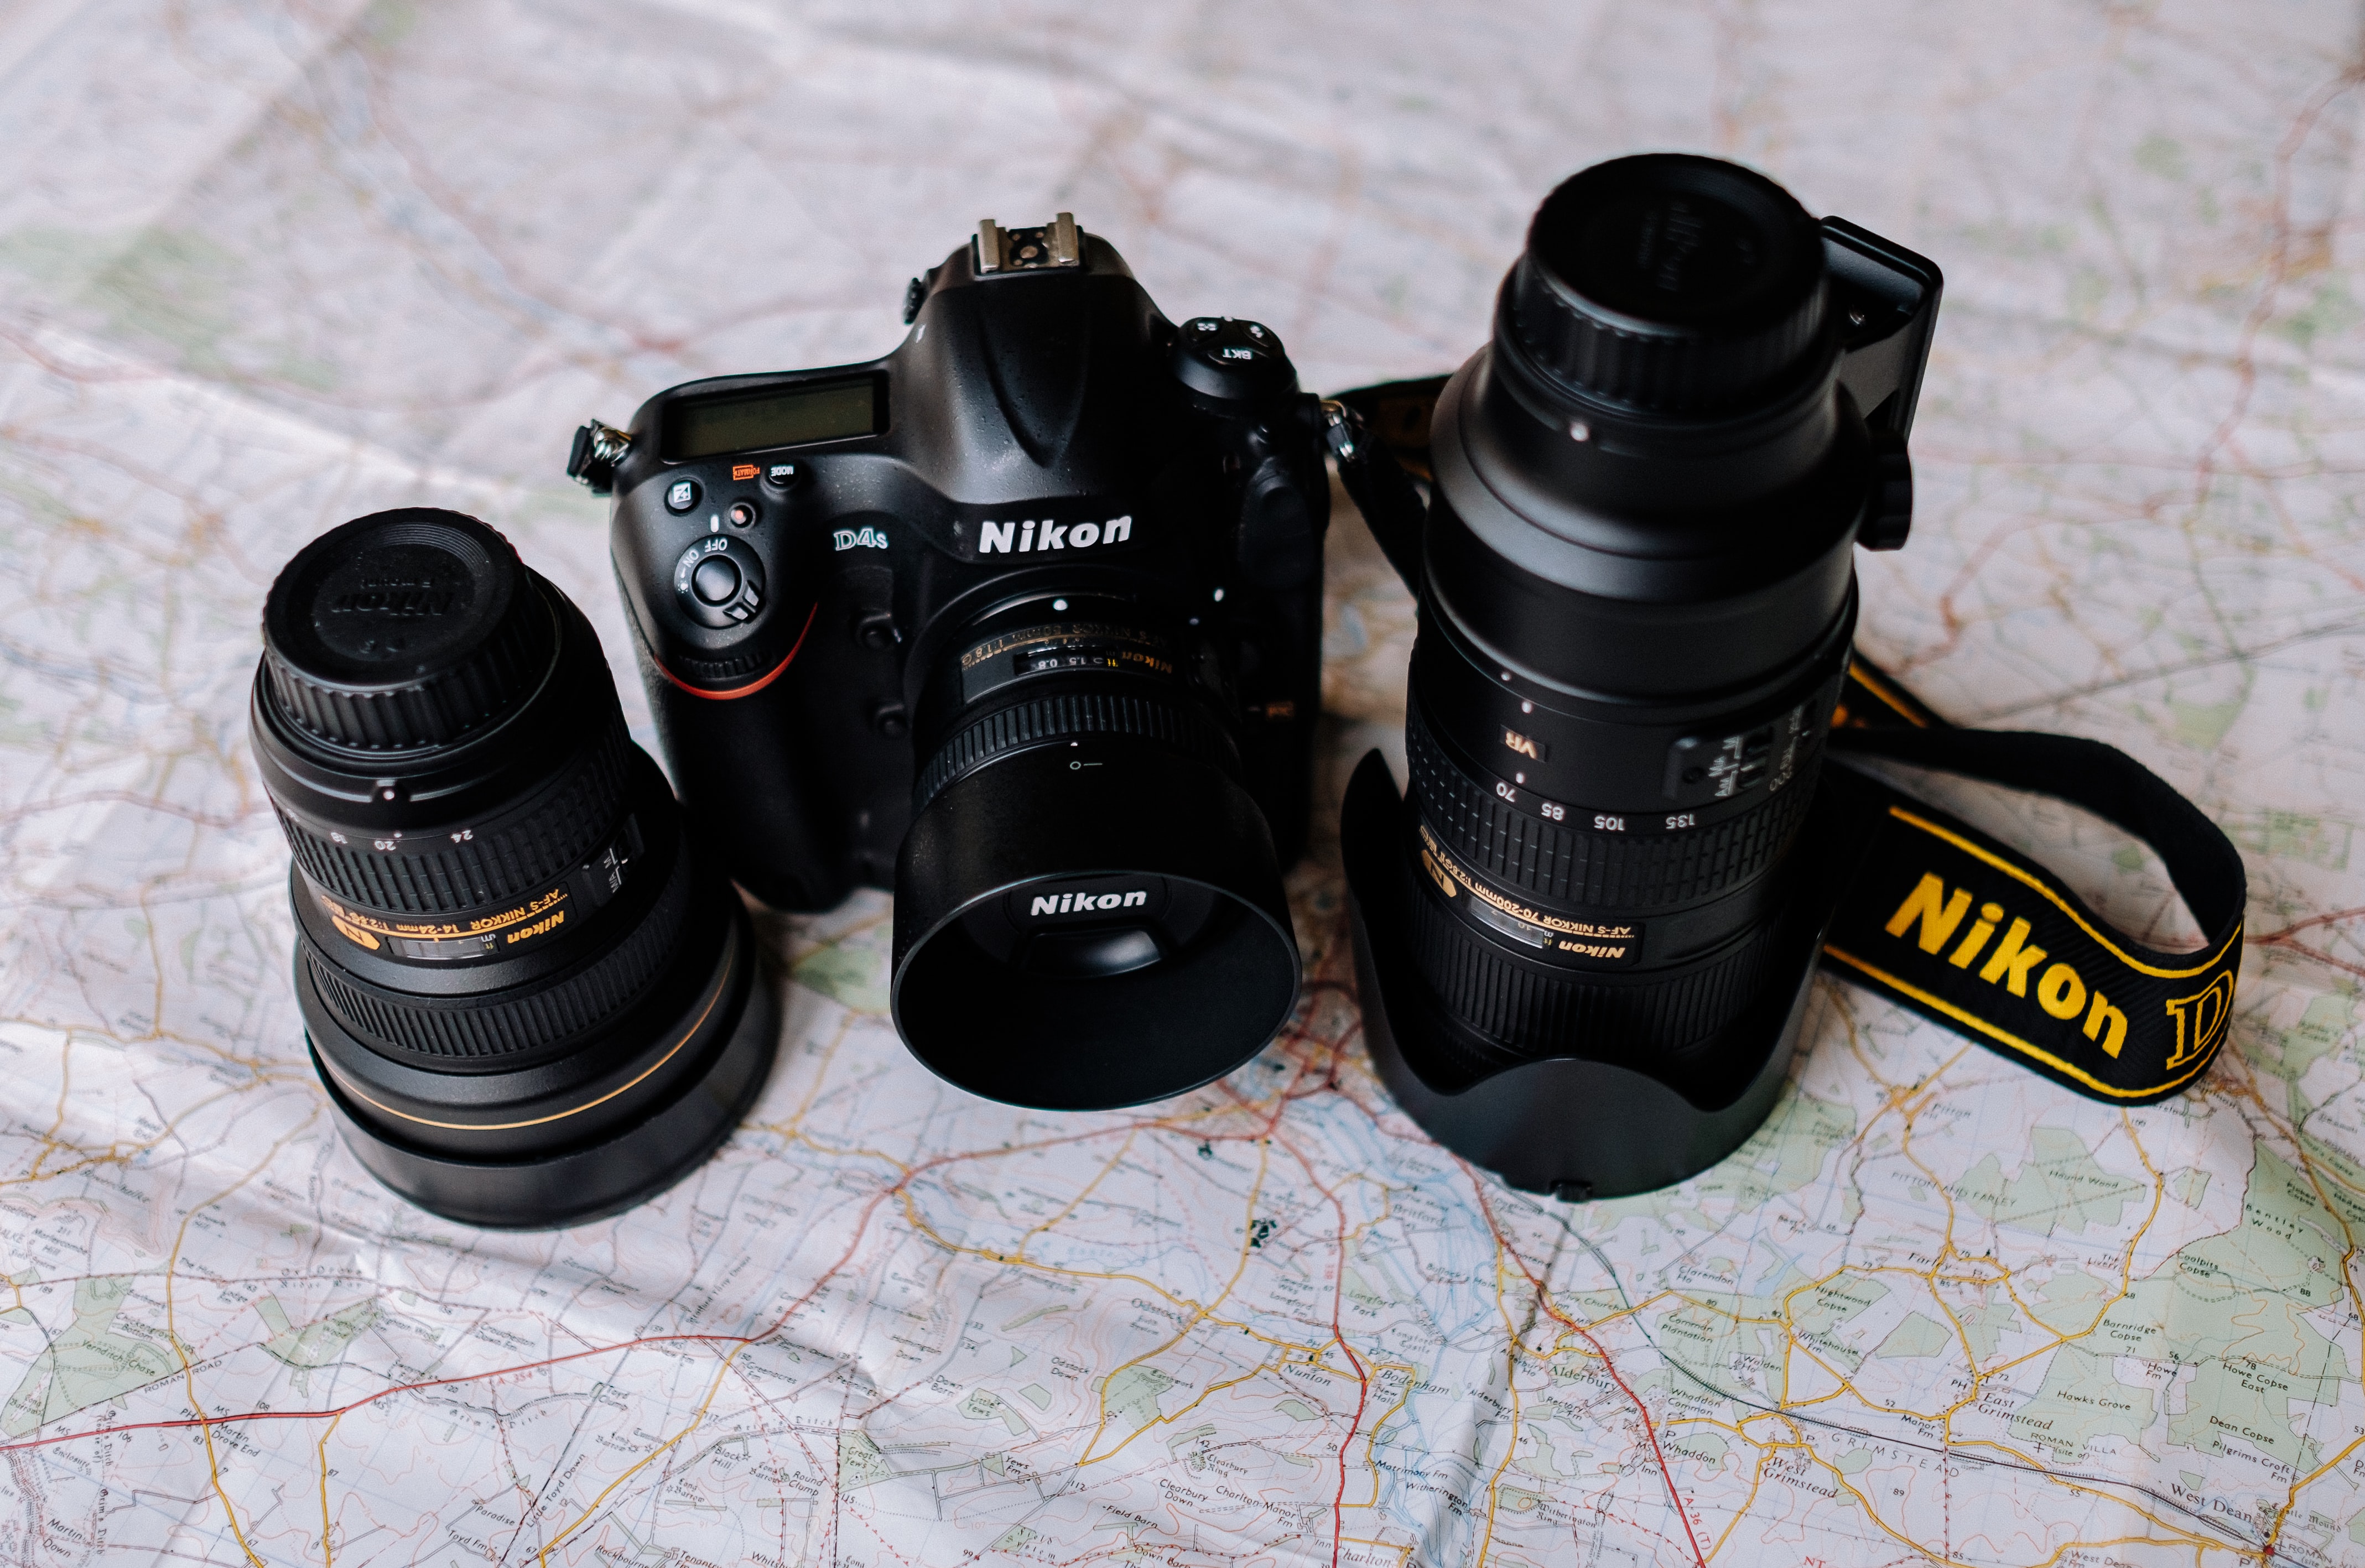 Nikon camera and lens on a map